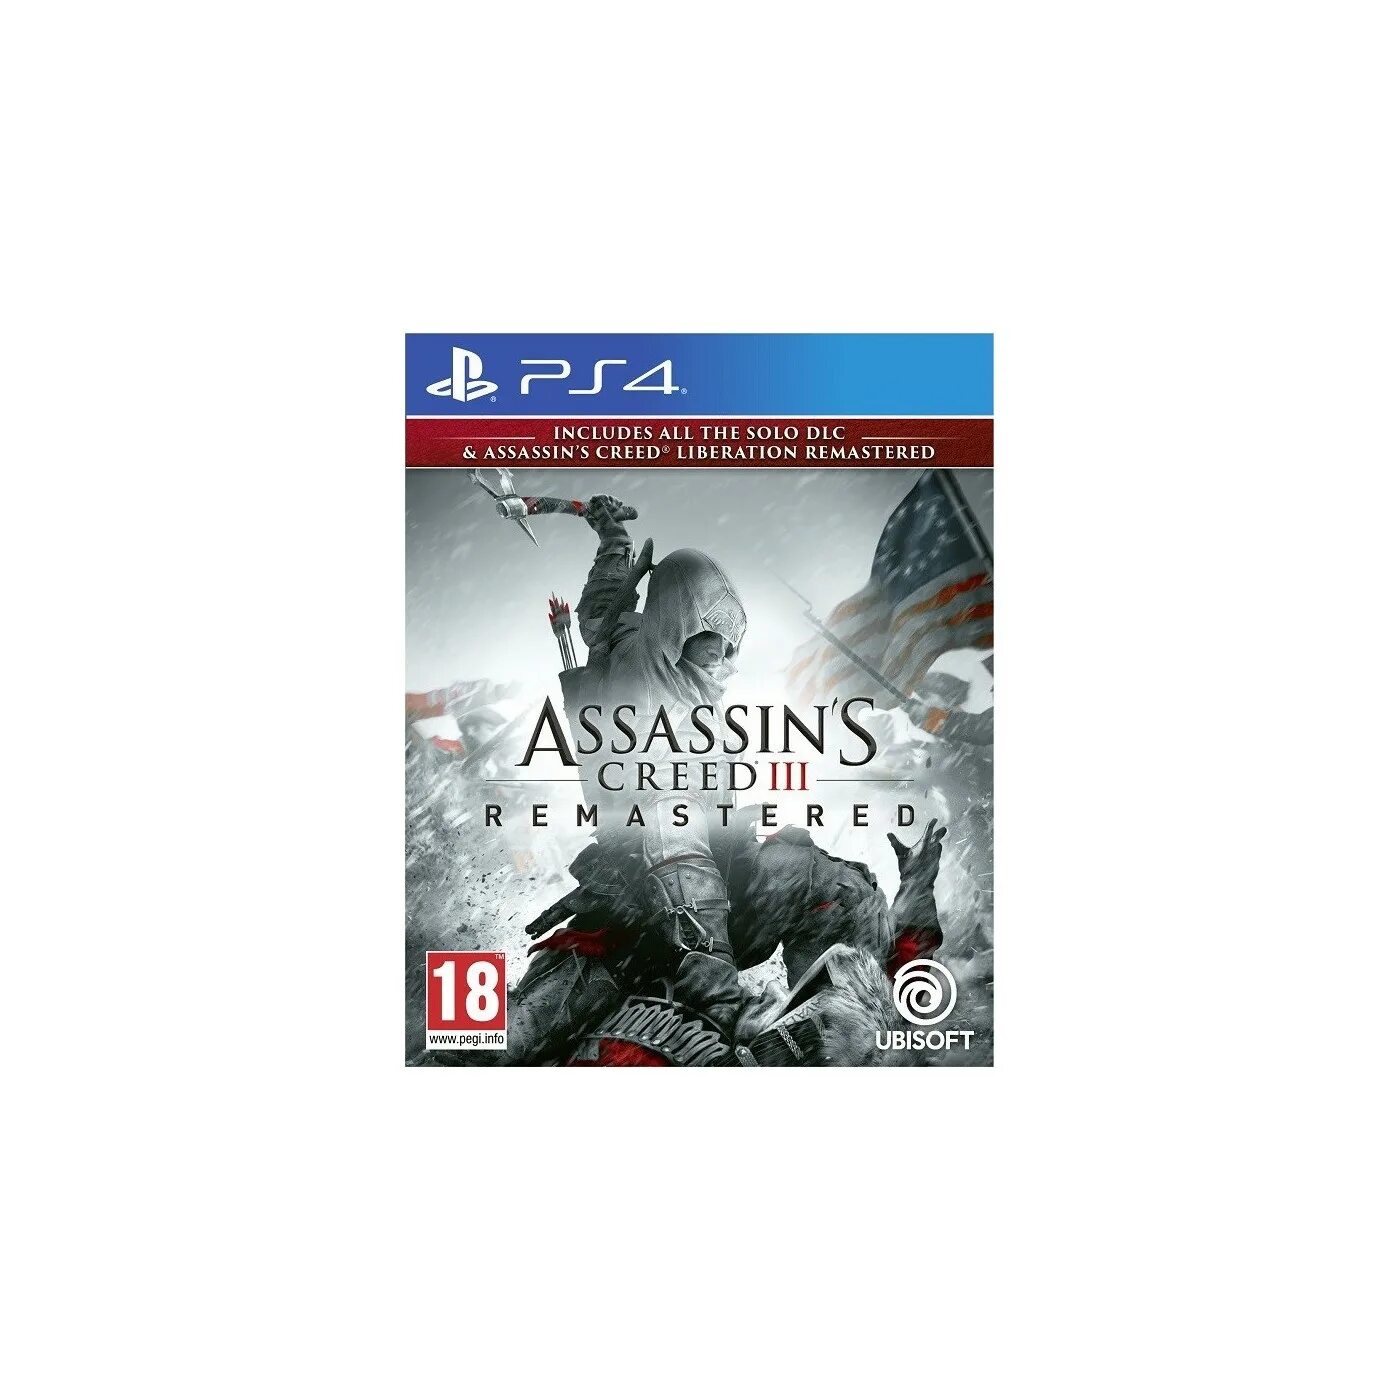 Ubisoft ps4. Assassins Creed 3 ps4 Remastered Liberation. Ассасин Крид освобождение ps4. Assassin's Creed III Remastered обложка ps4. Assassin's Creed 3 ps4 диск.